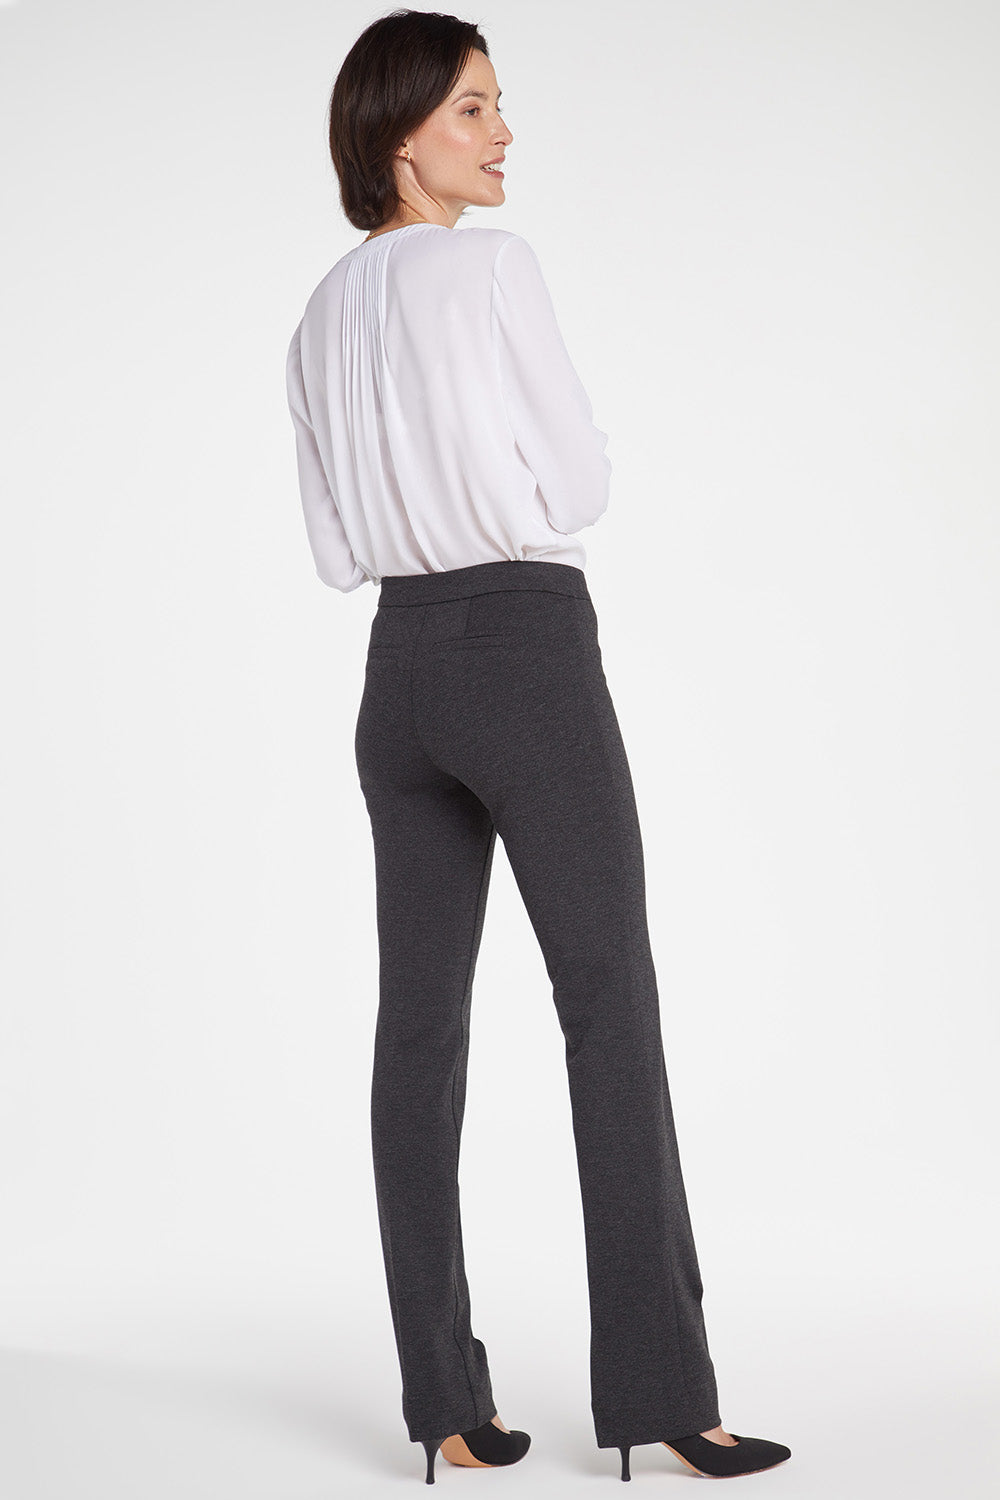 NYDJ Slim Trouser Pants In Ponte Knit - Charcoal Heathered